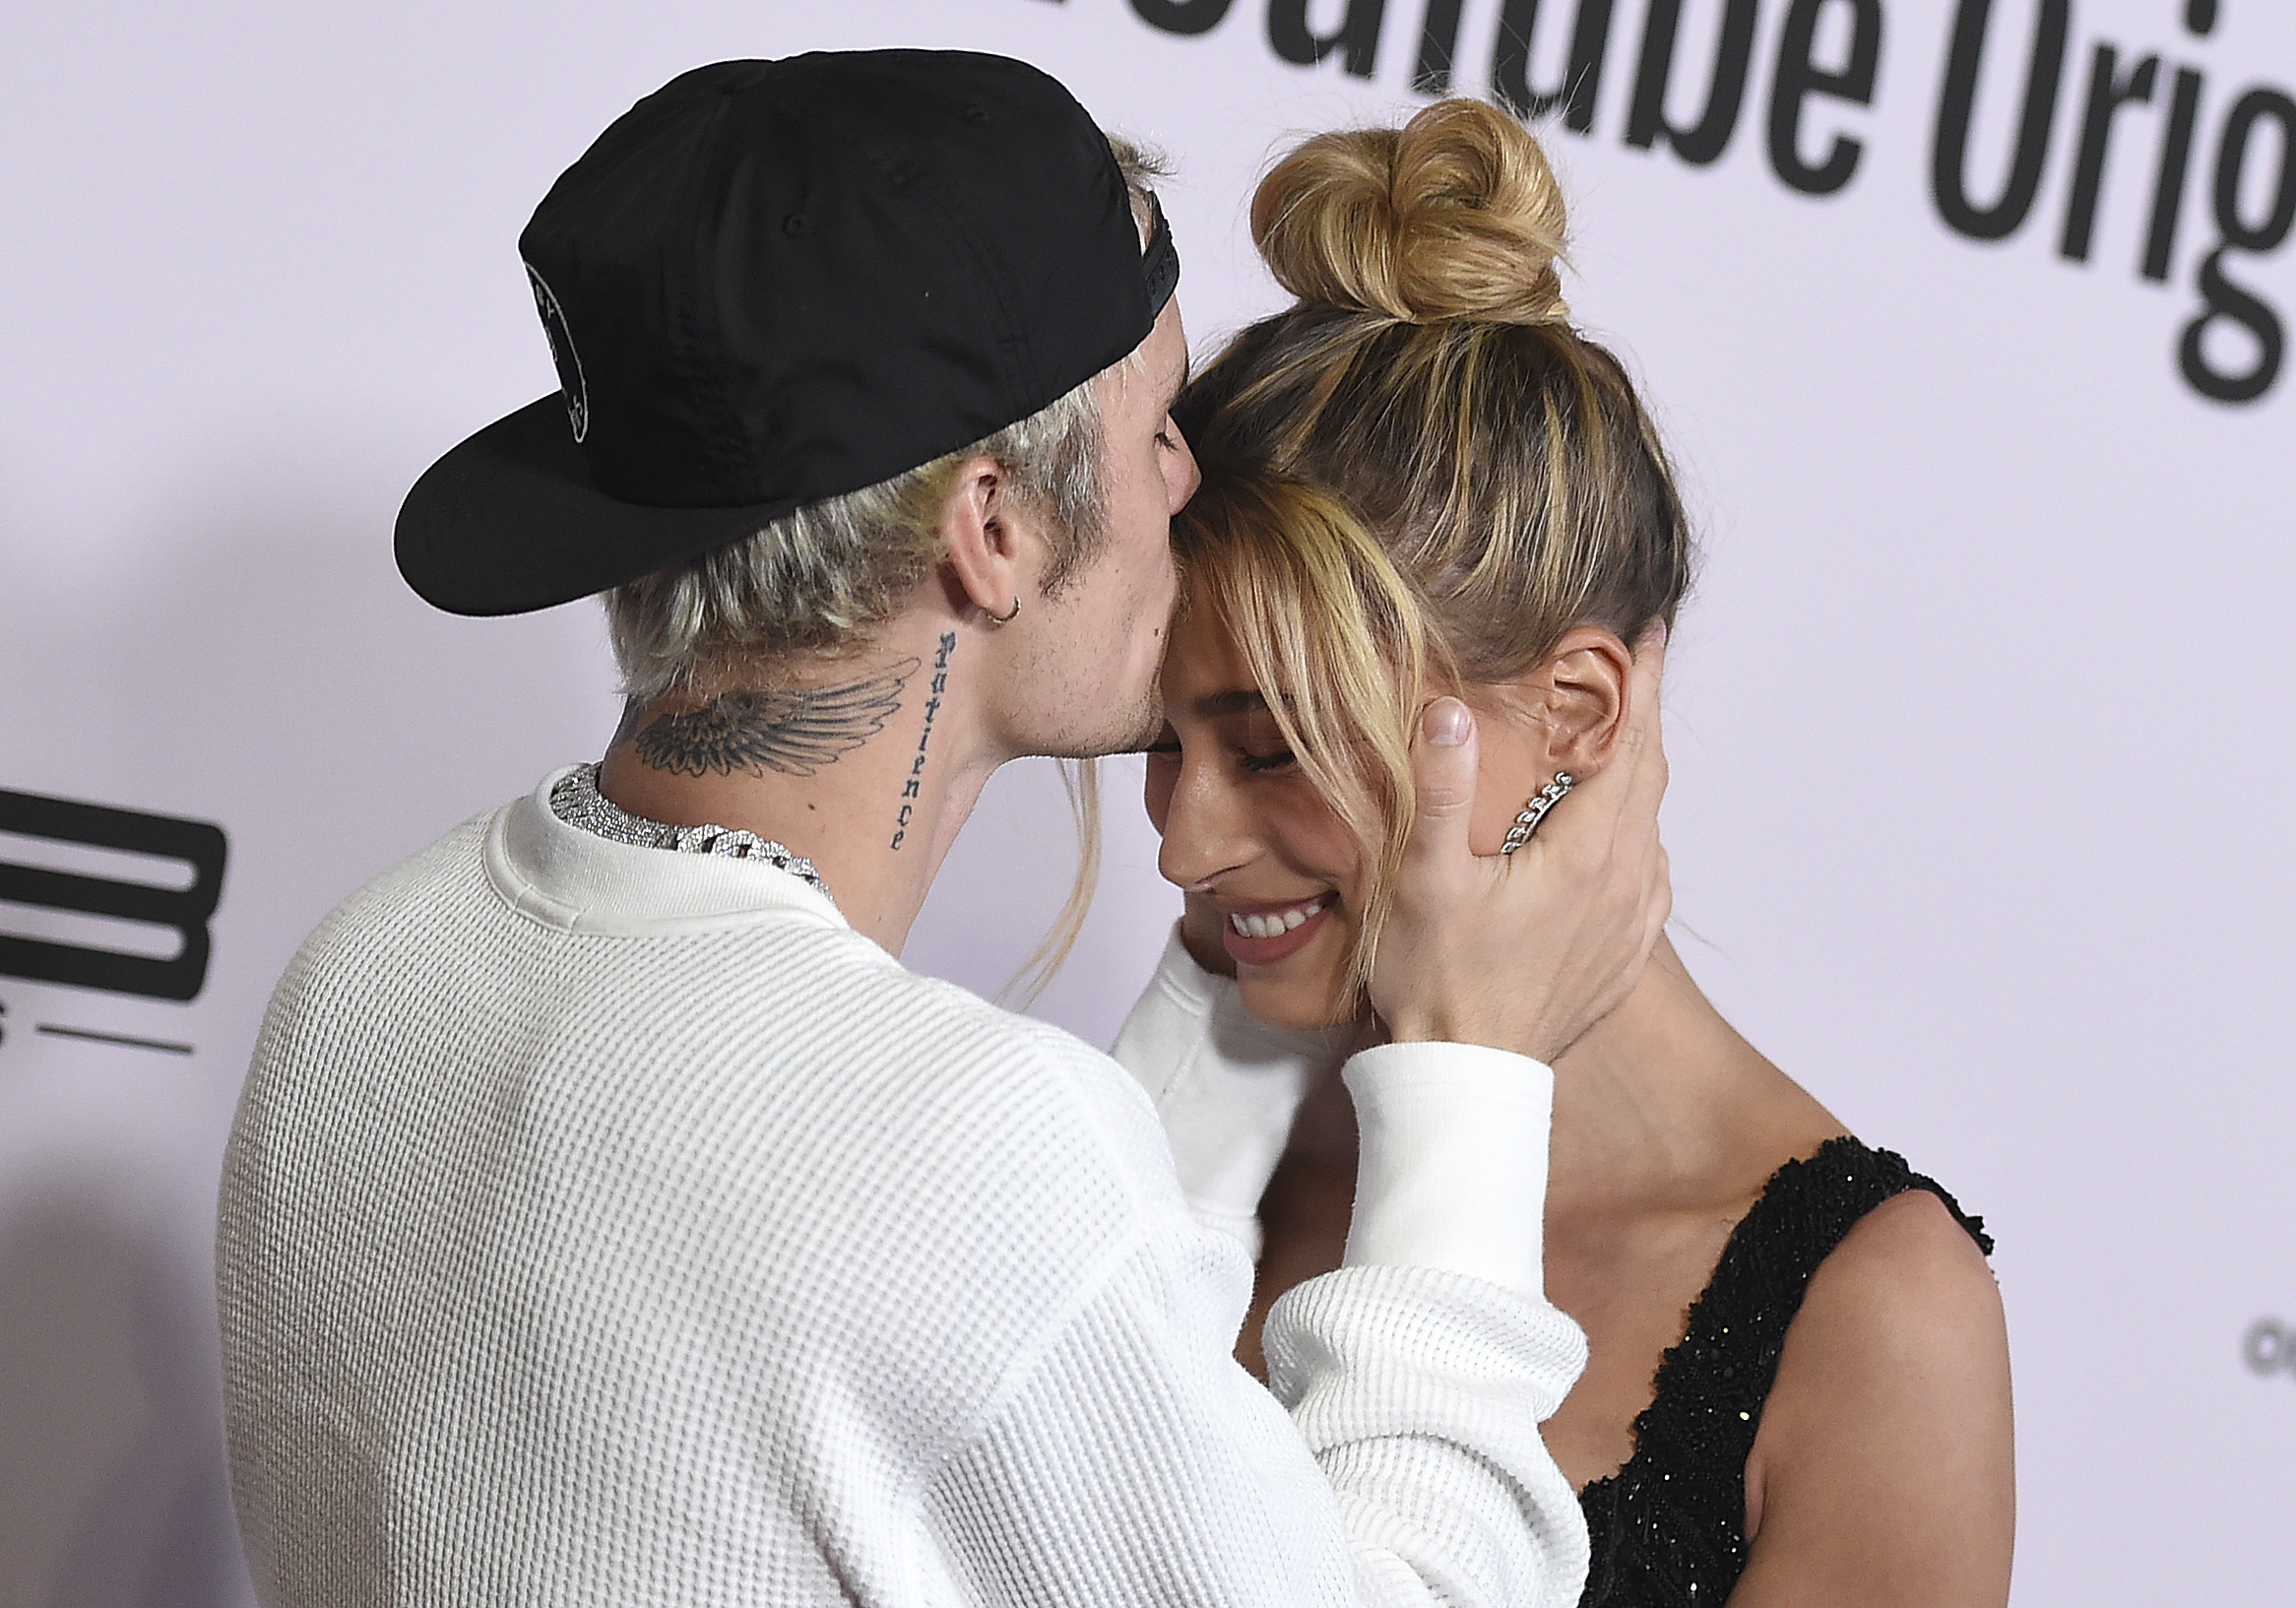 Justin Bieber and Hailey Baldwin arrive at the Los Angeles premiere of "Justin Bieber: Seasons," Monday, Jan. 27, 2020. (Photo by Jordan Strauss/Invision/AP)